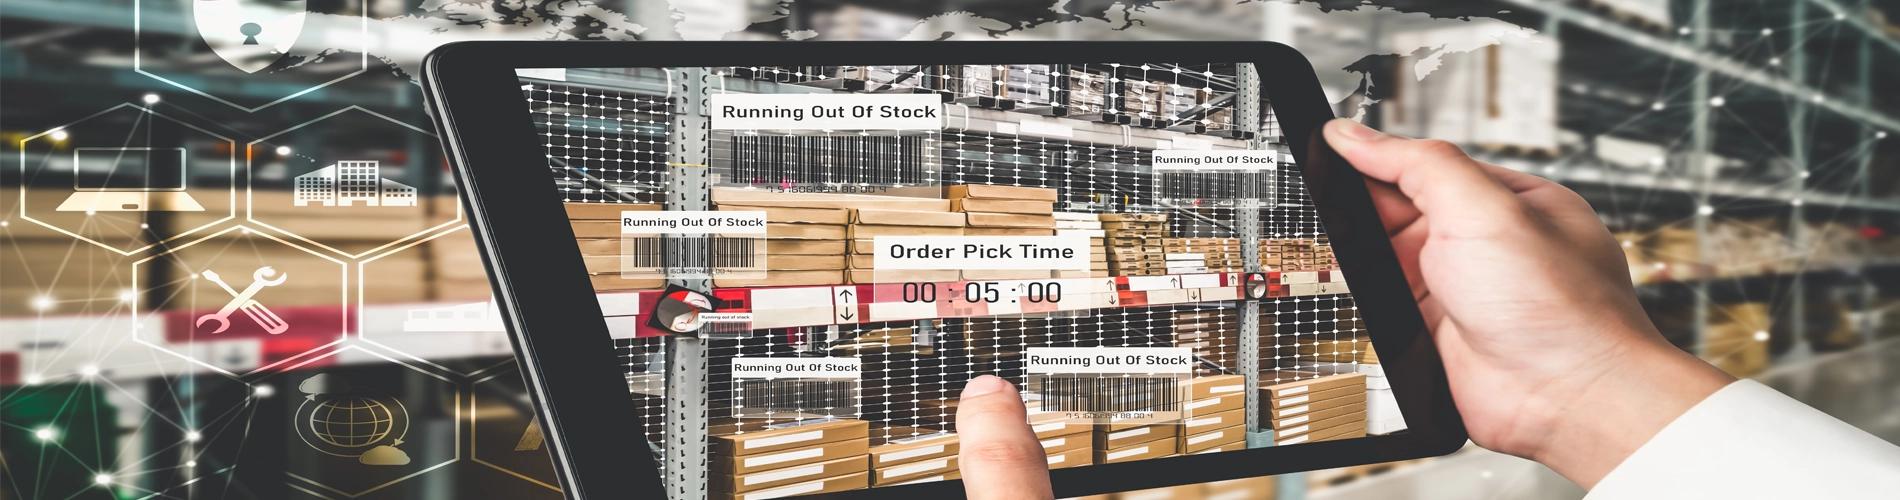 Optimize Your Supply Chain with ERP Software Systems